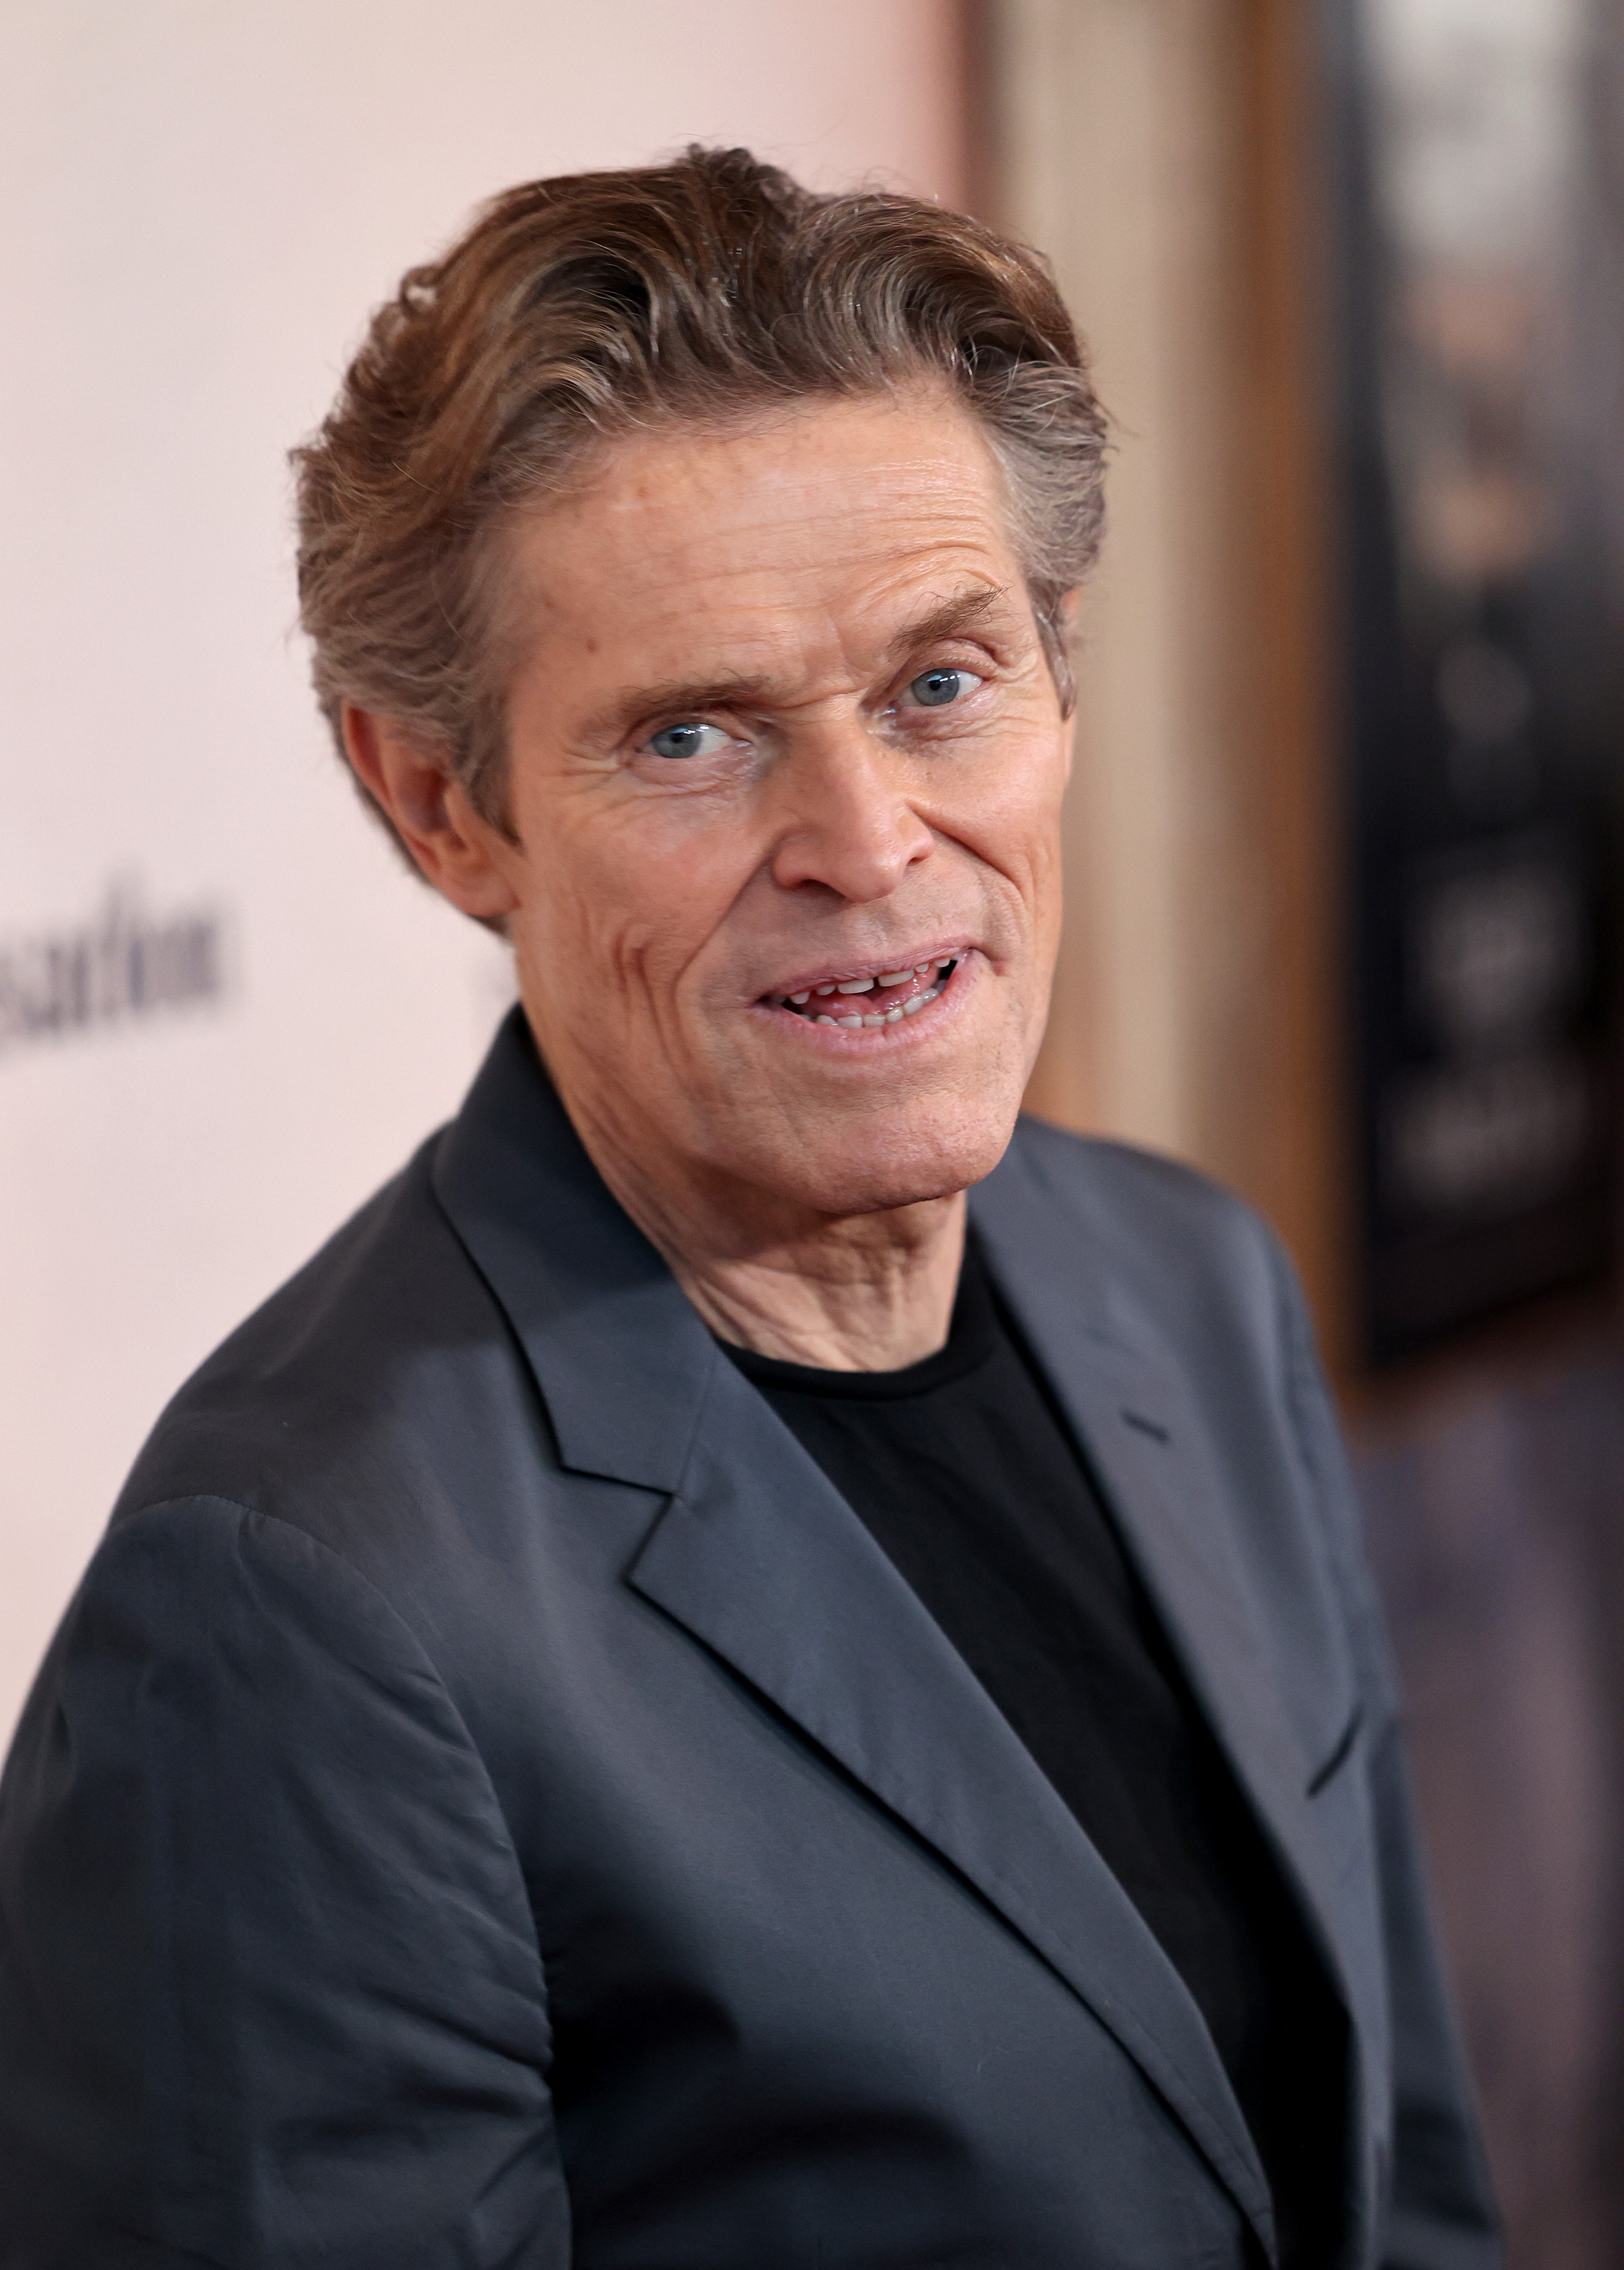 Willem Dafoe at the premiere of "Dead For A Dollar" on September 28, 2022, in Los Angeles, California. | Source: Getty Images